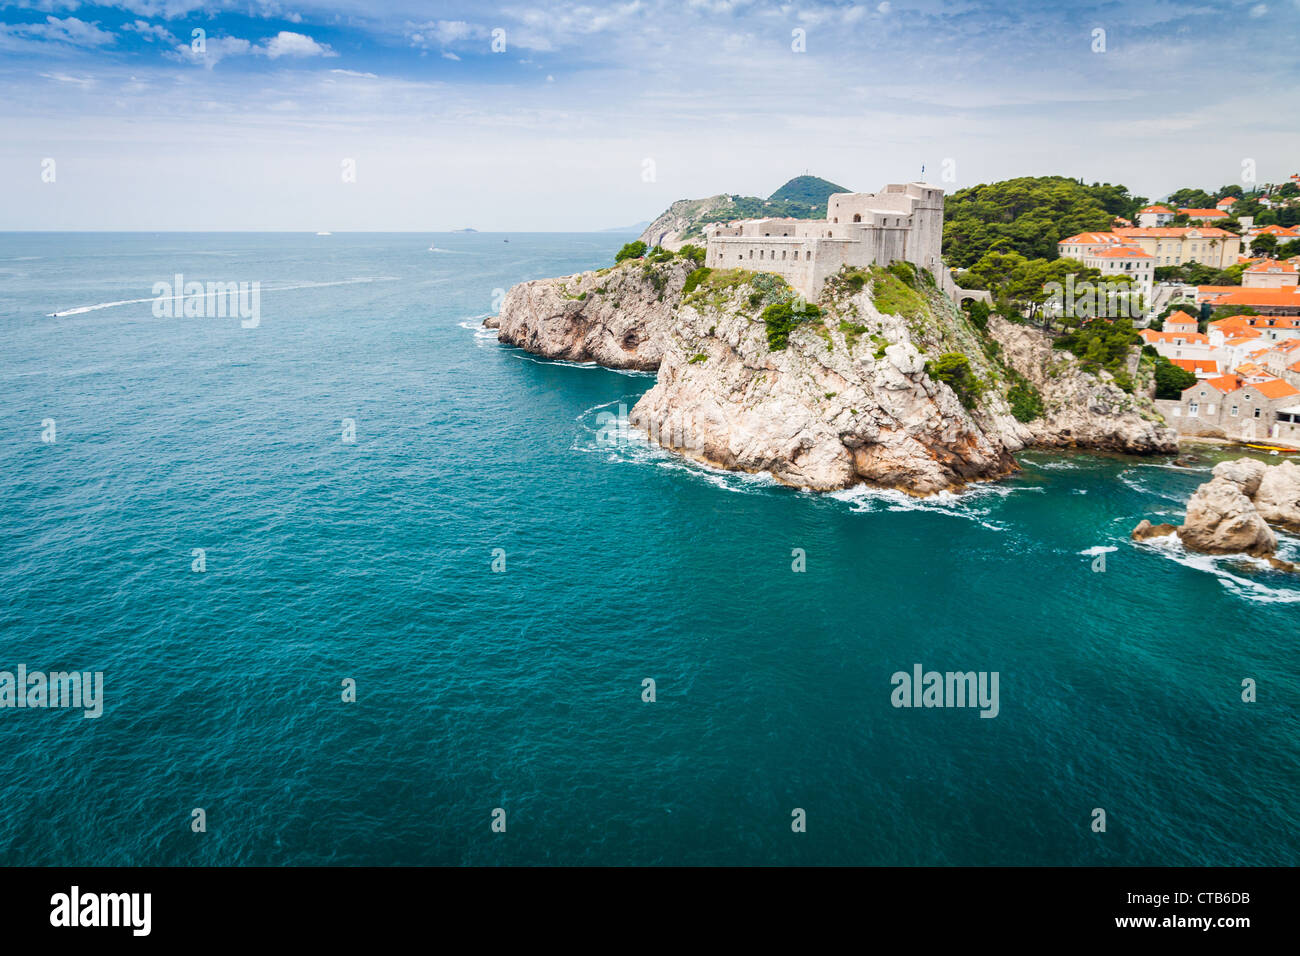 Fort on a cliff in Dubrovnik, Croatia Stock Photo